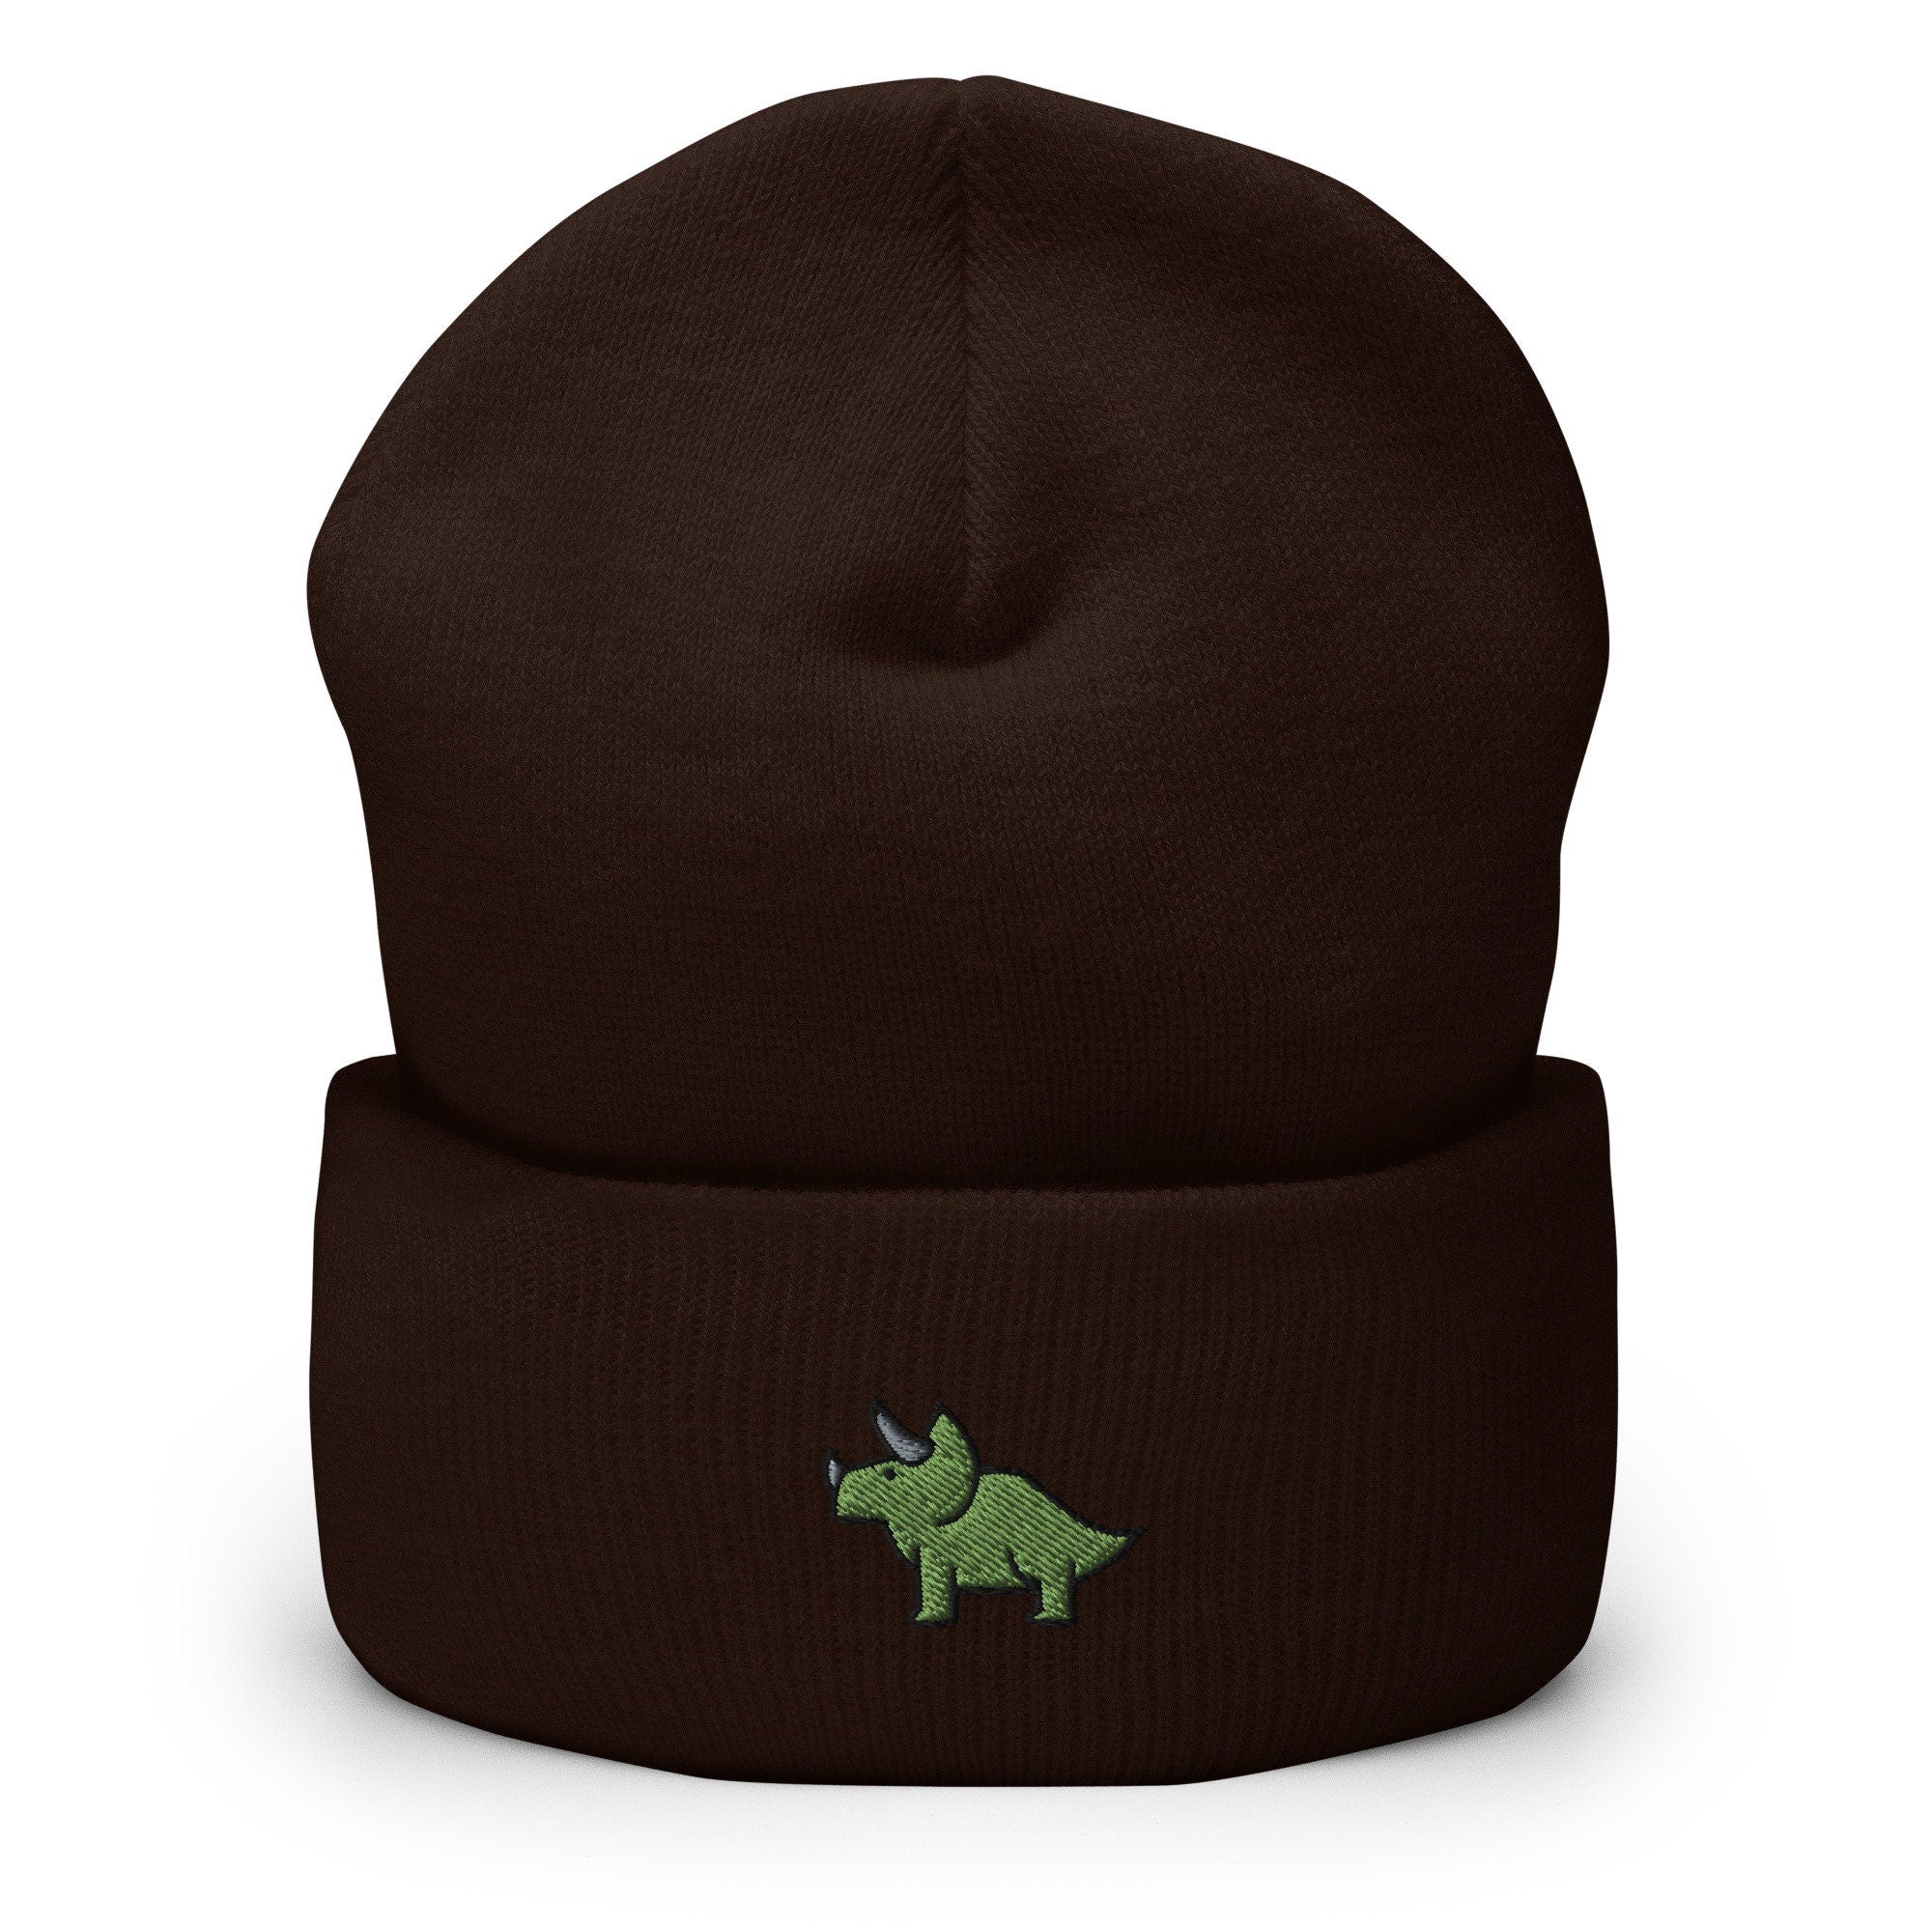 Triceratops Dinosaur Embroidered Beanie, Handmade Cuffed Knit Unisex Slouchy Adult Winter Hat Cap Gift